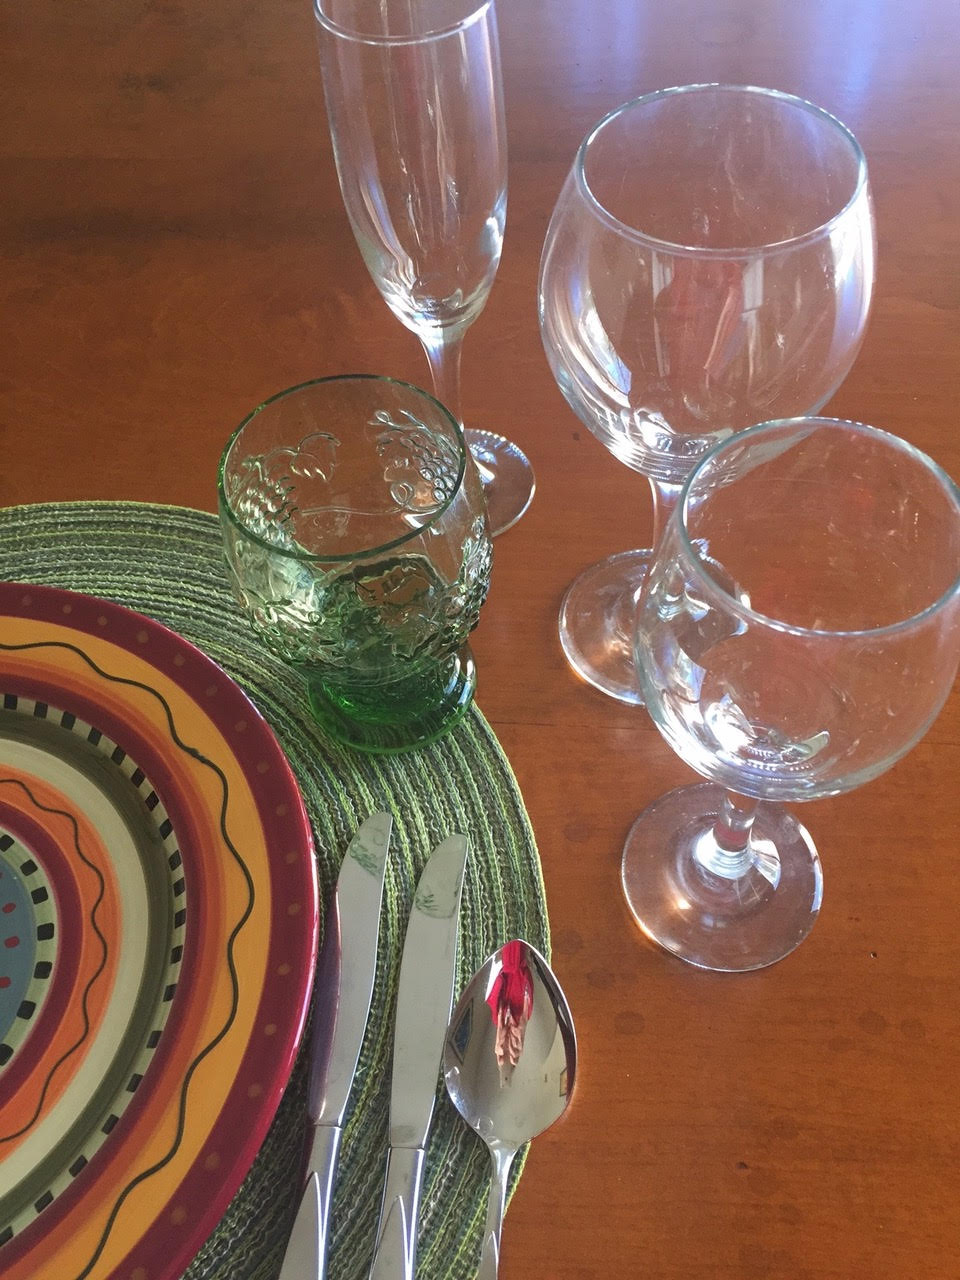 Placing Wine Glasses on Your Table